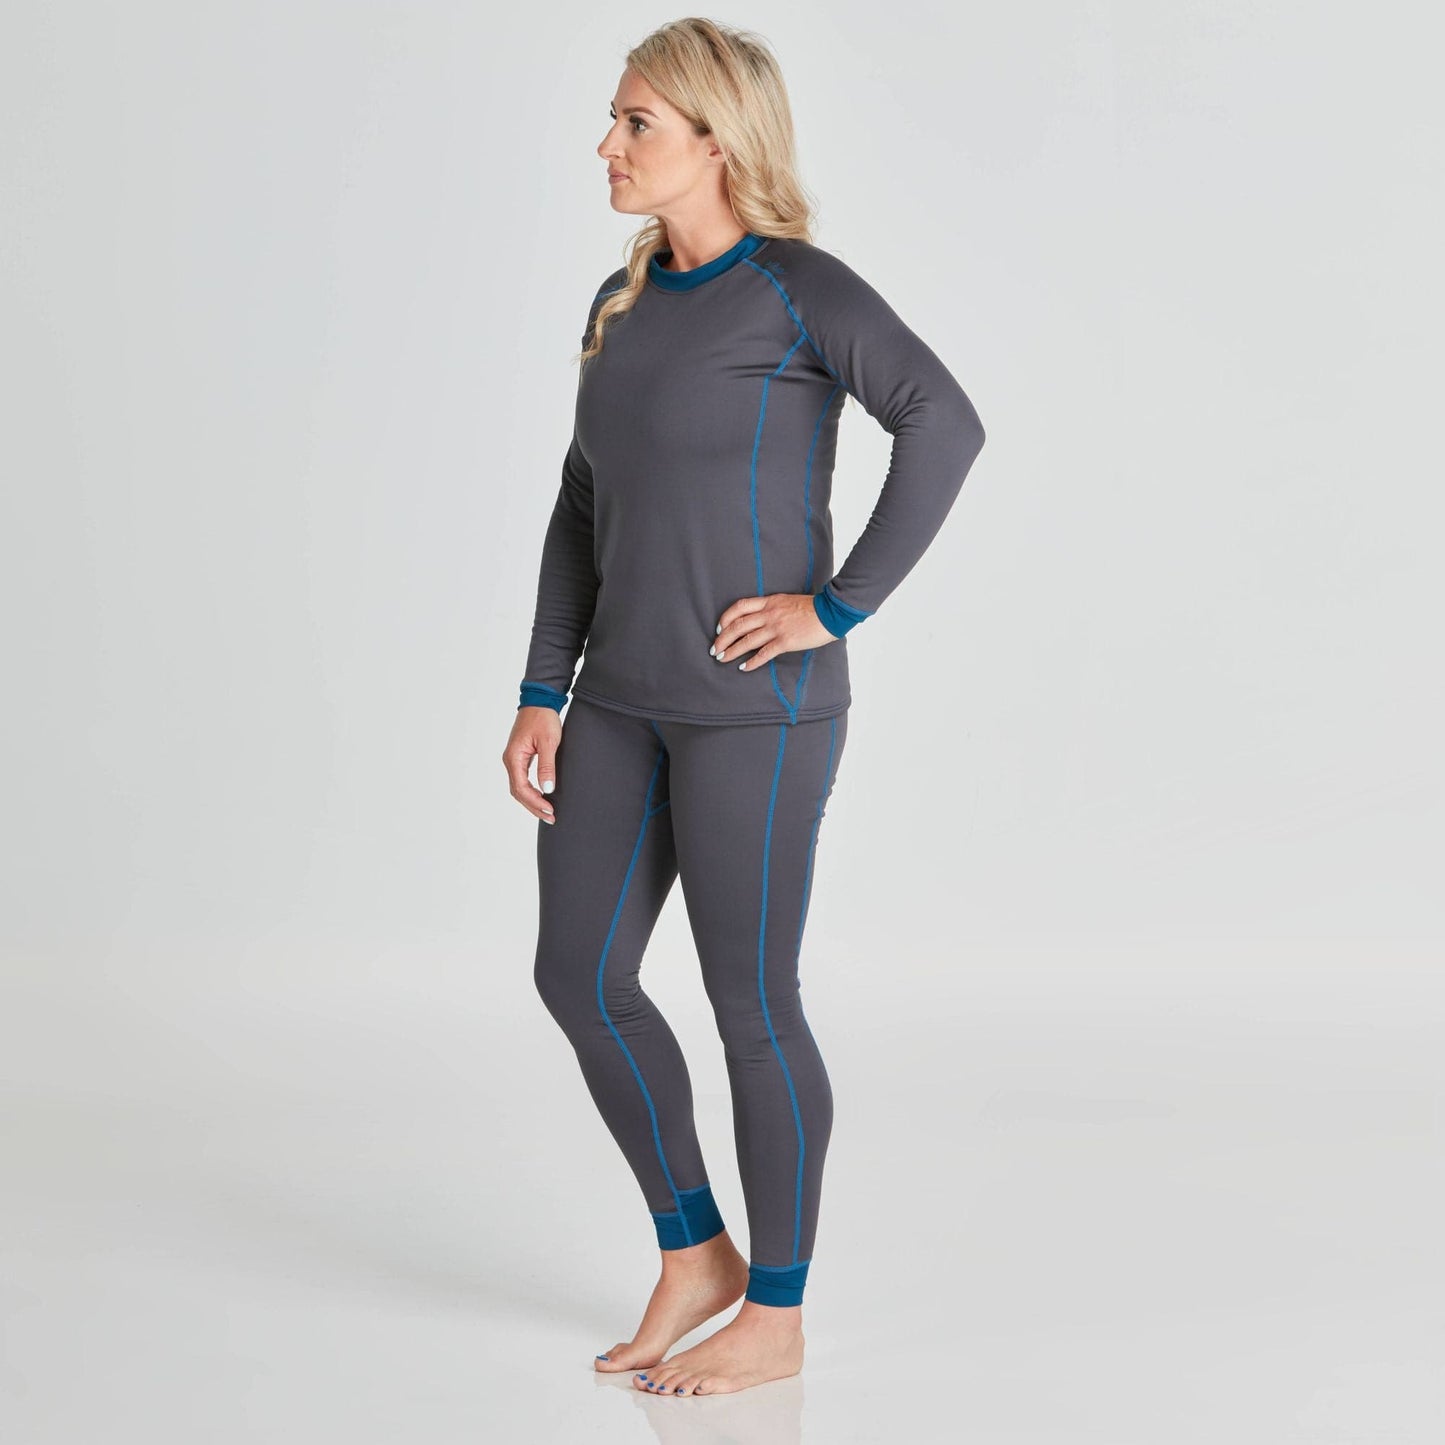 A woman wearing a cozy and comfortable NRS Expedition Fleece - Women's grey and blue thermal pyjama set.